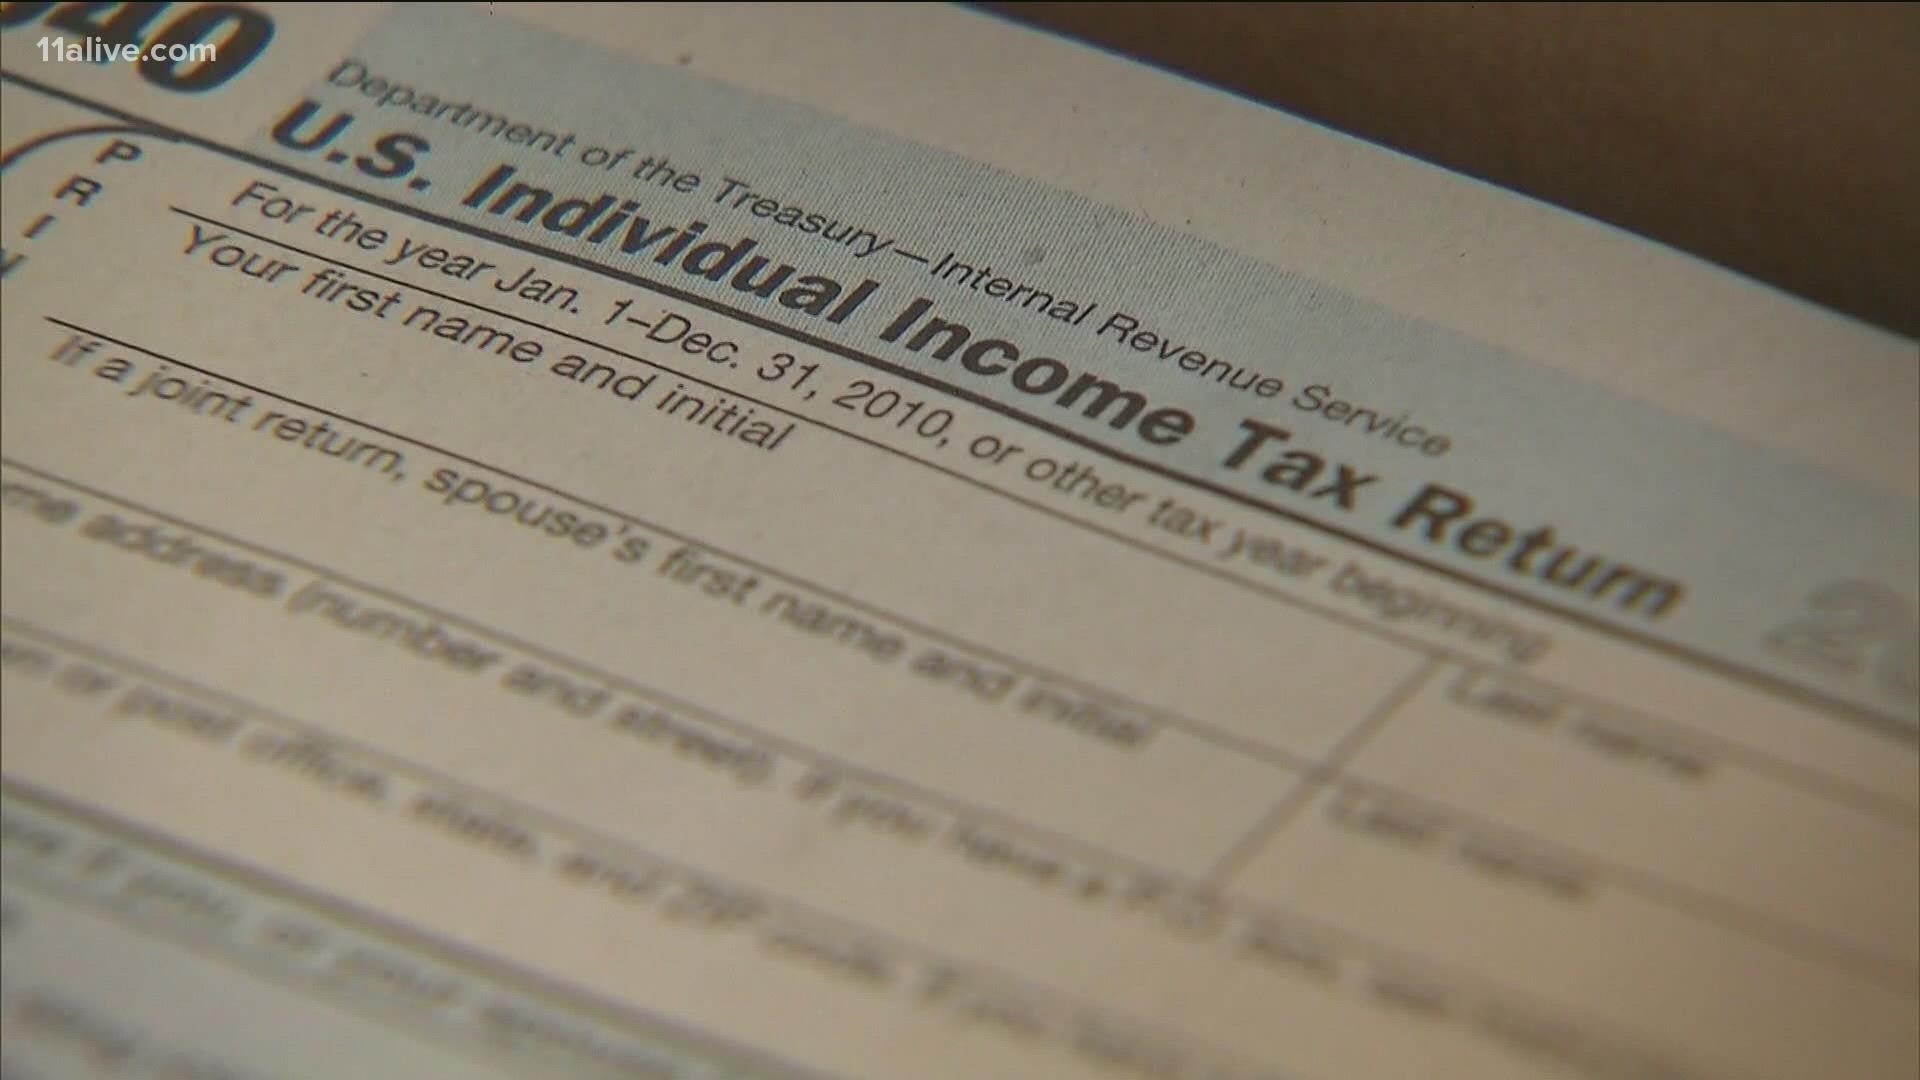 No more state income tax... Could Georgia become the next state to try to eliminate it, as we head into an intense election year?